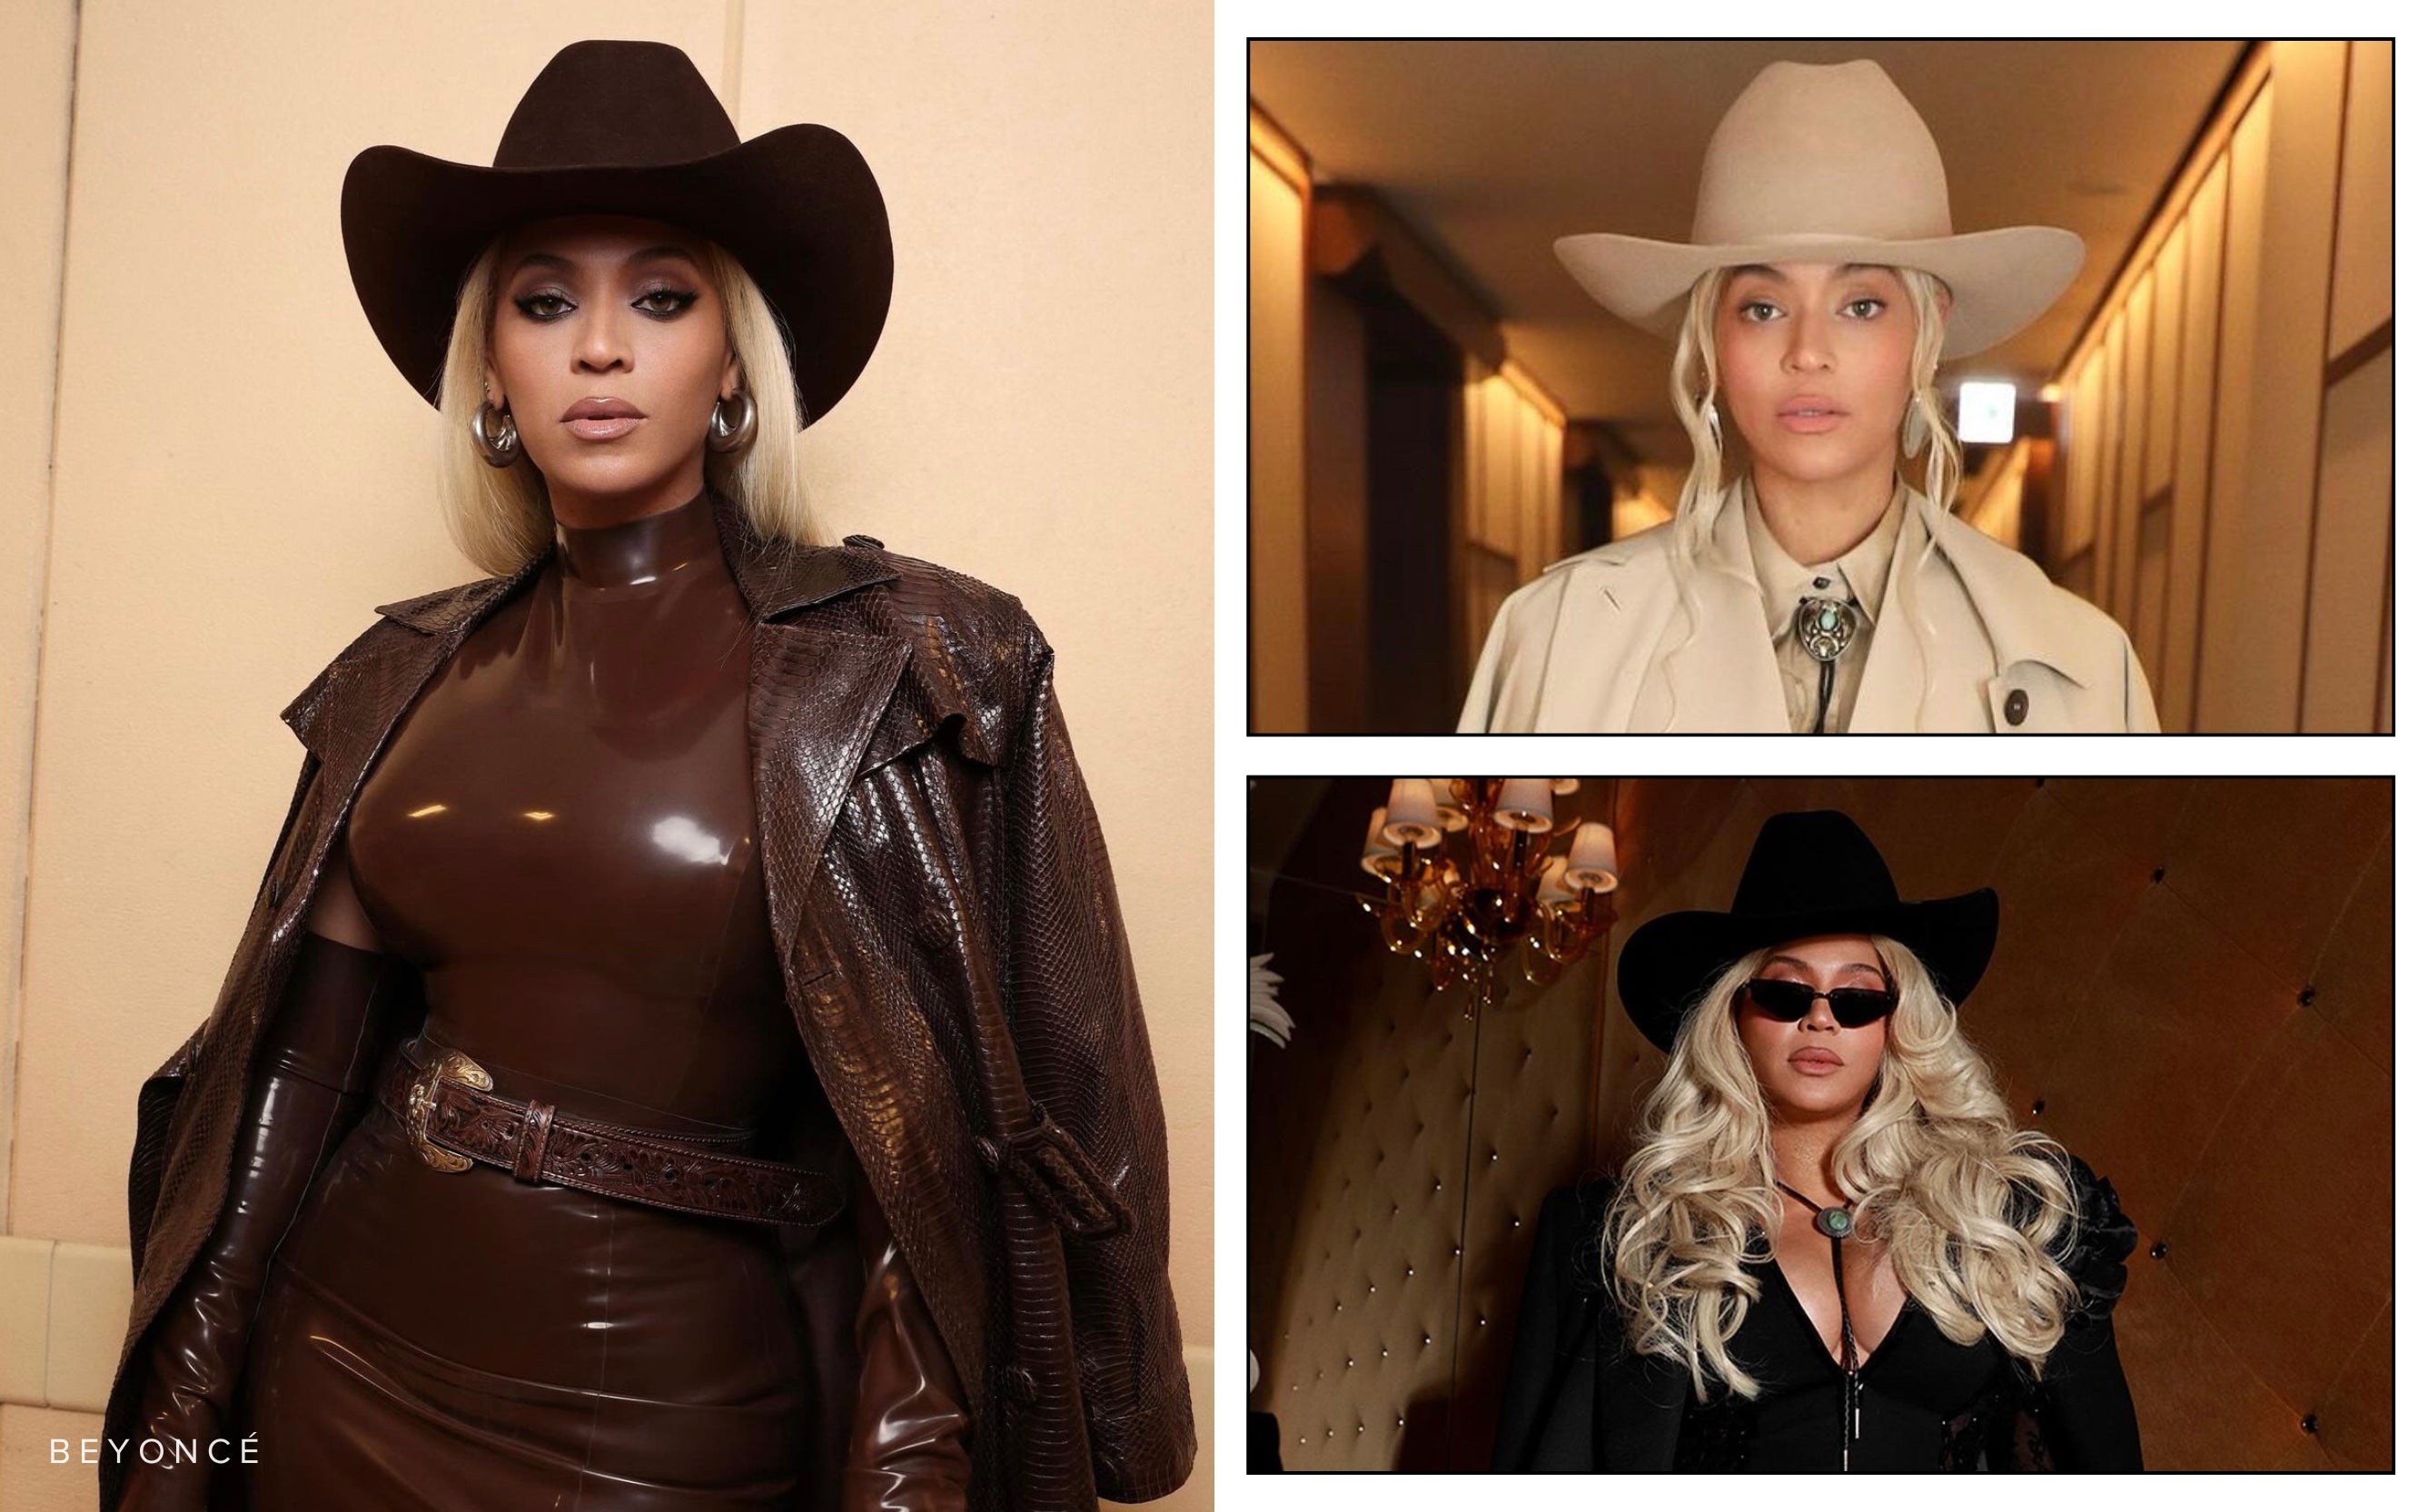 Beyonce shown in three images wearing western hats and accessories